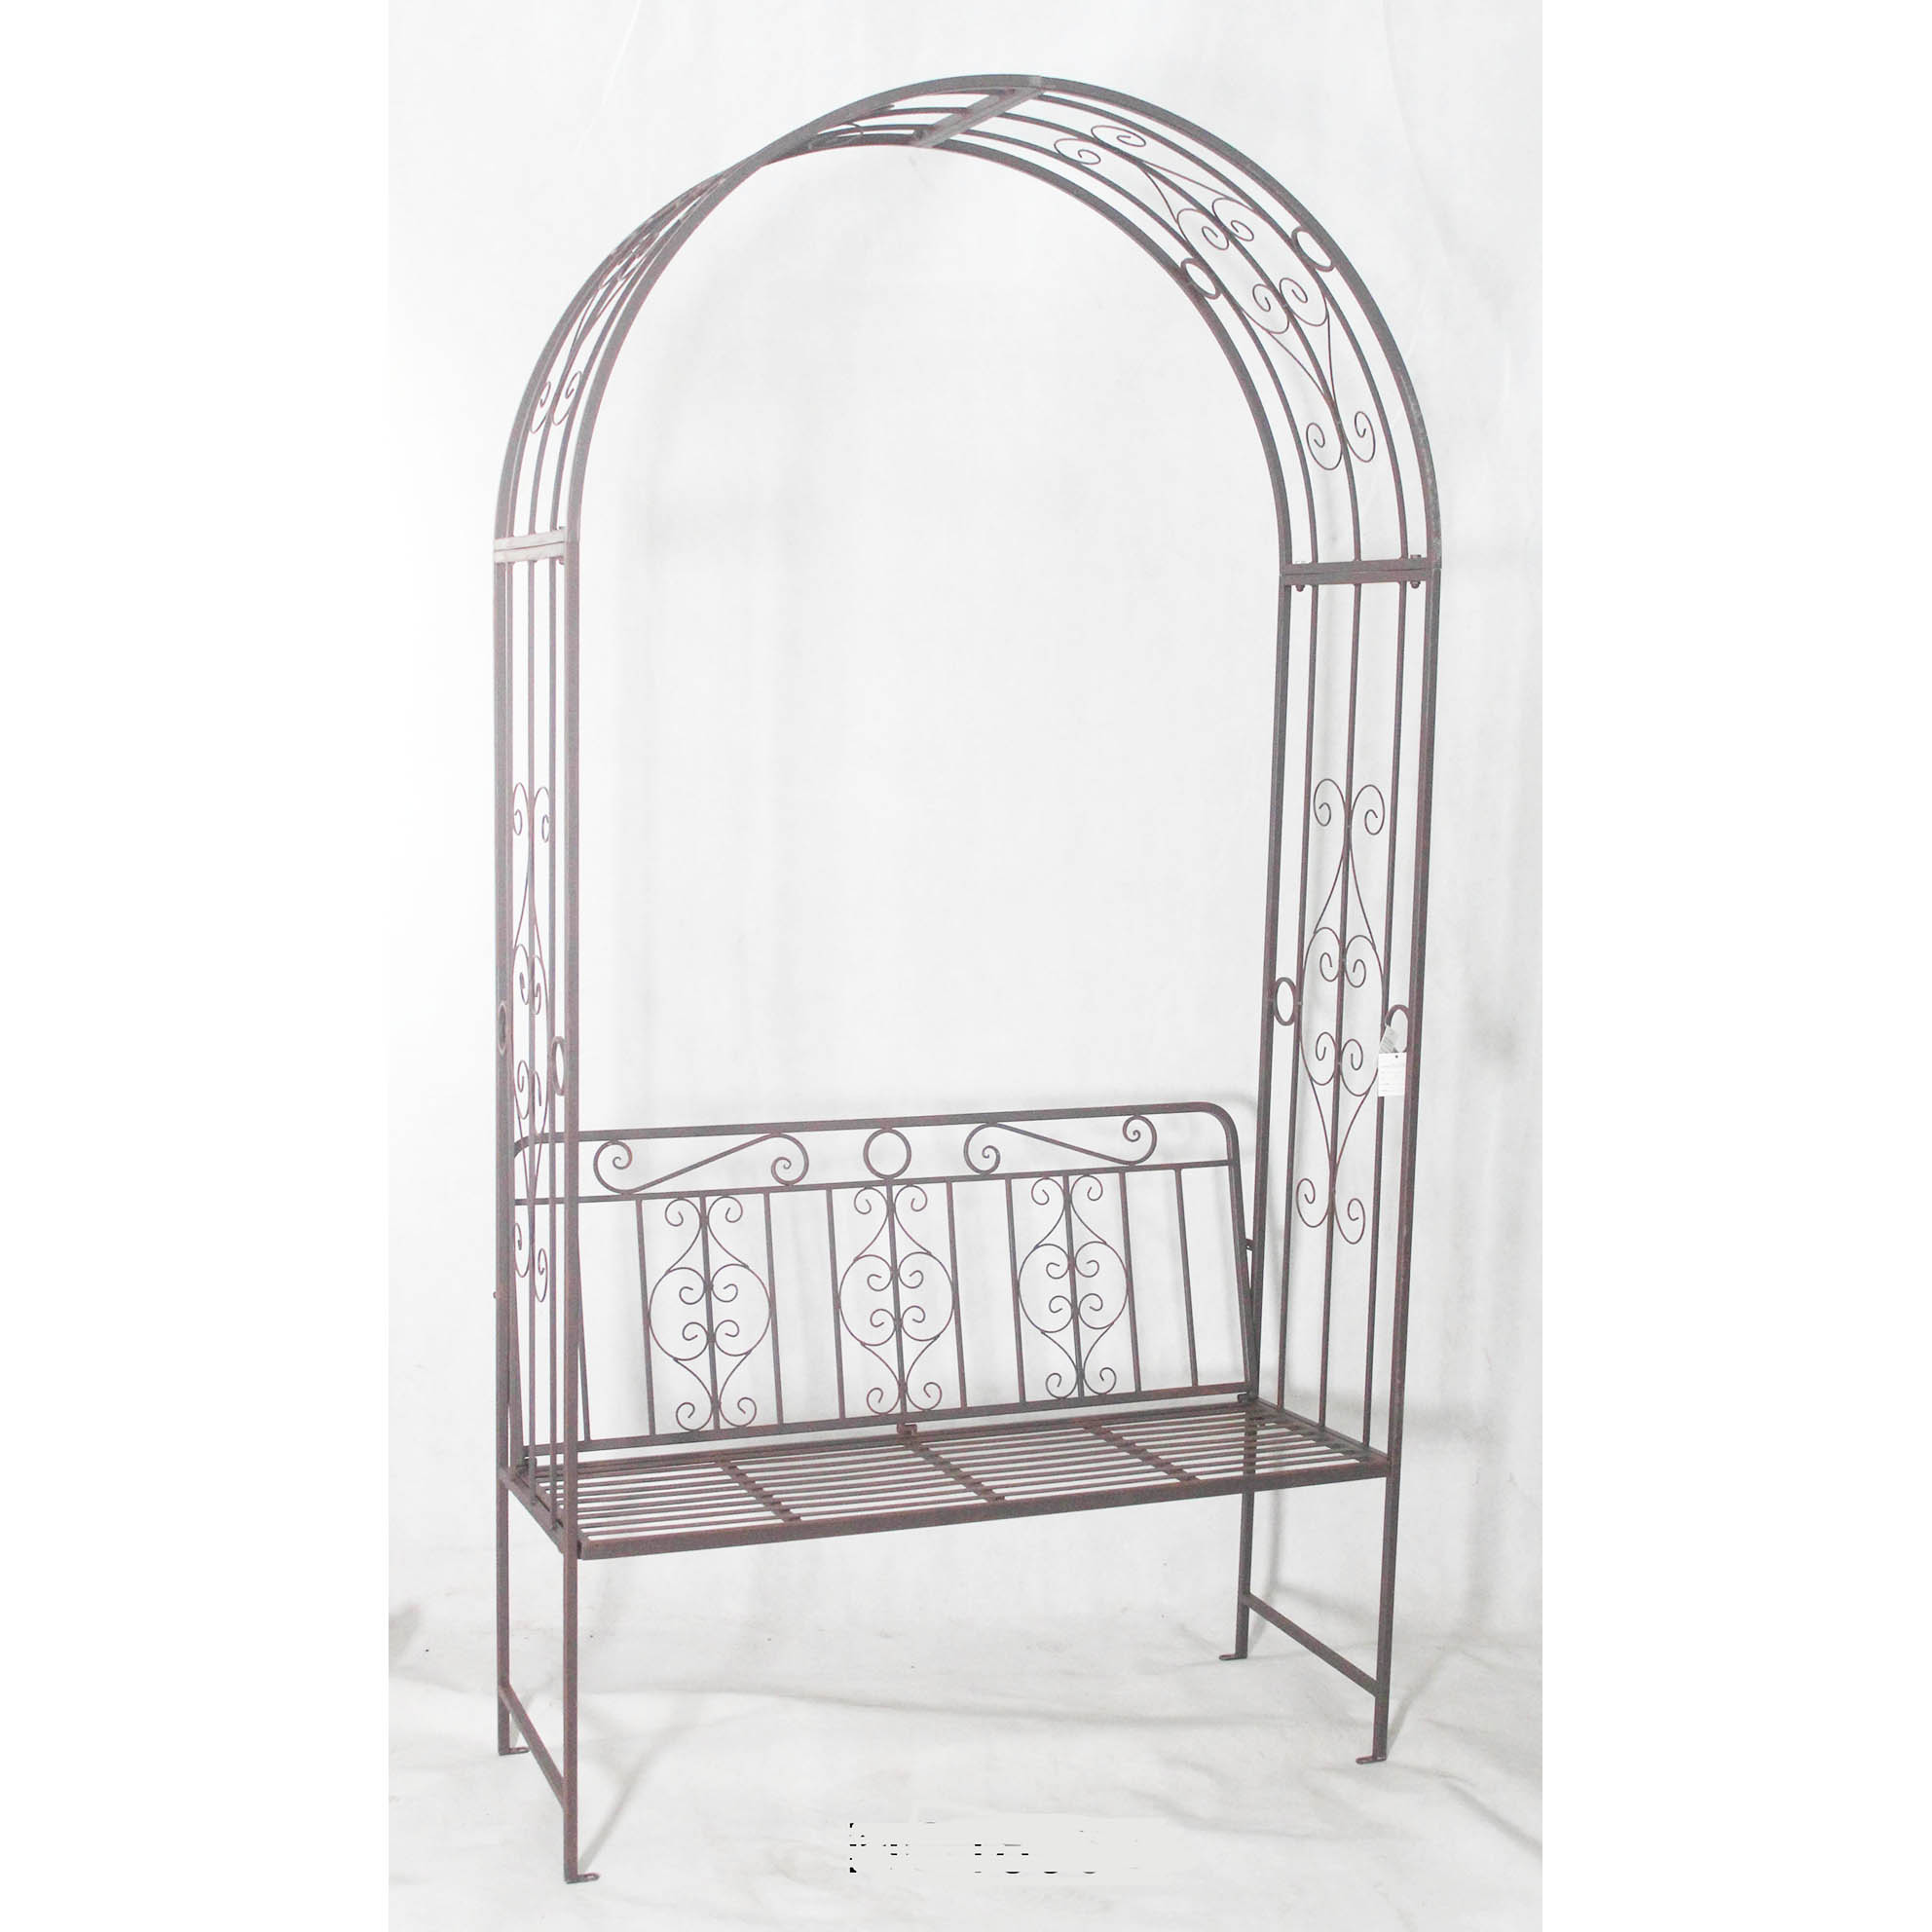 Metal garden bench with arch